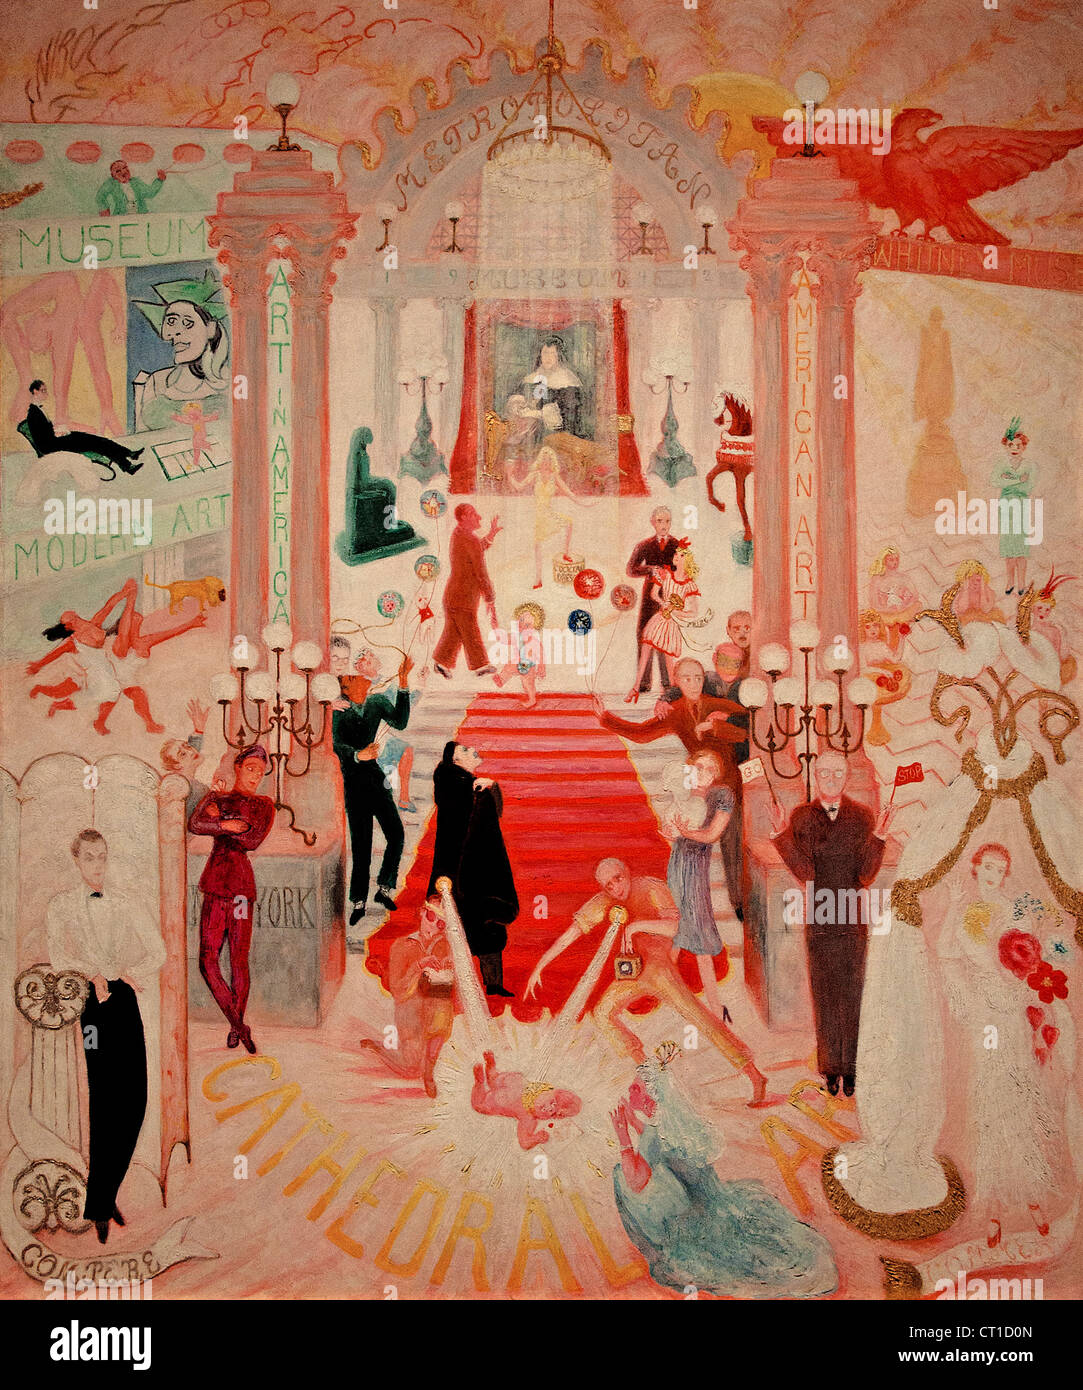 The Cathedrals of Art 1942 Florine Stettheimer American United States of America Stock Photo